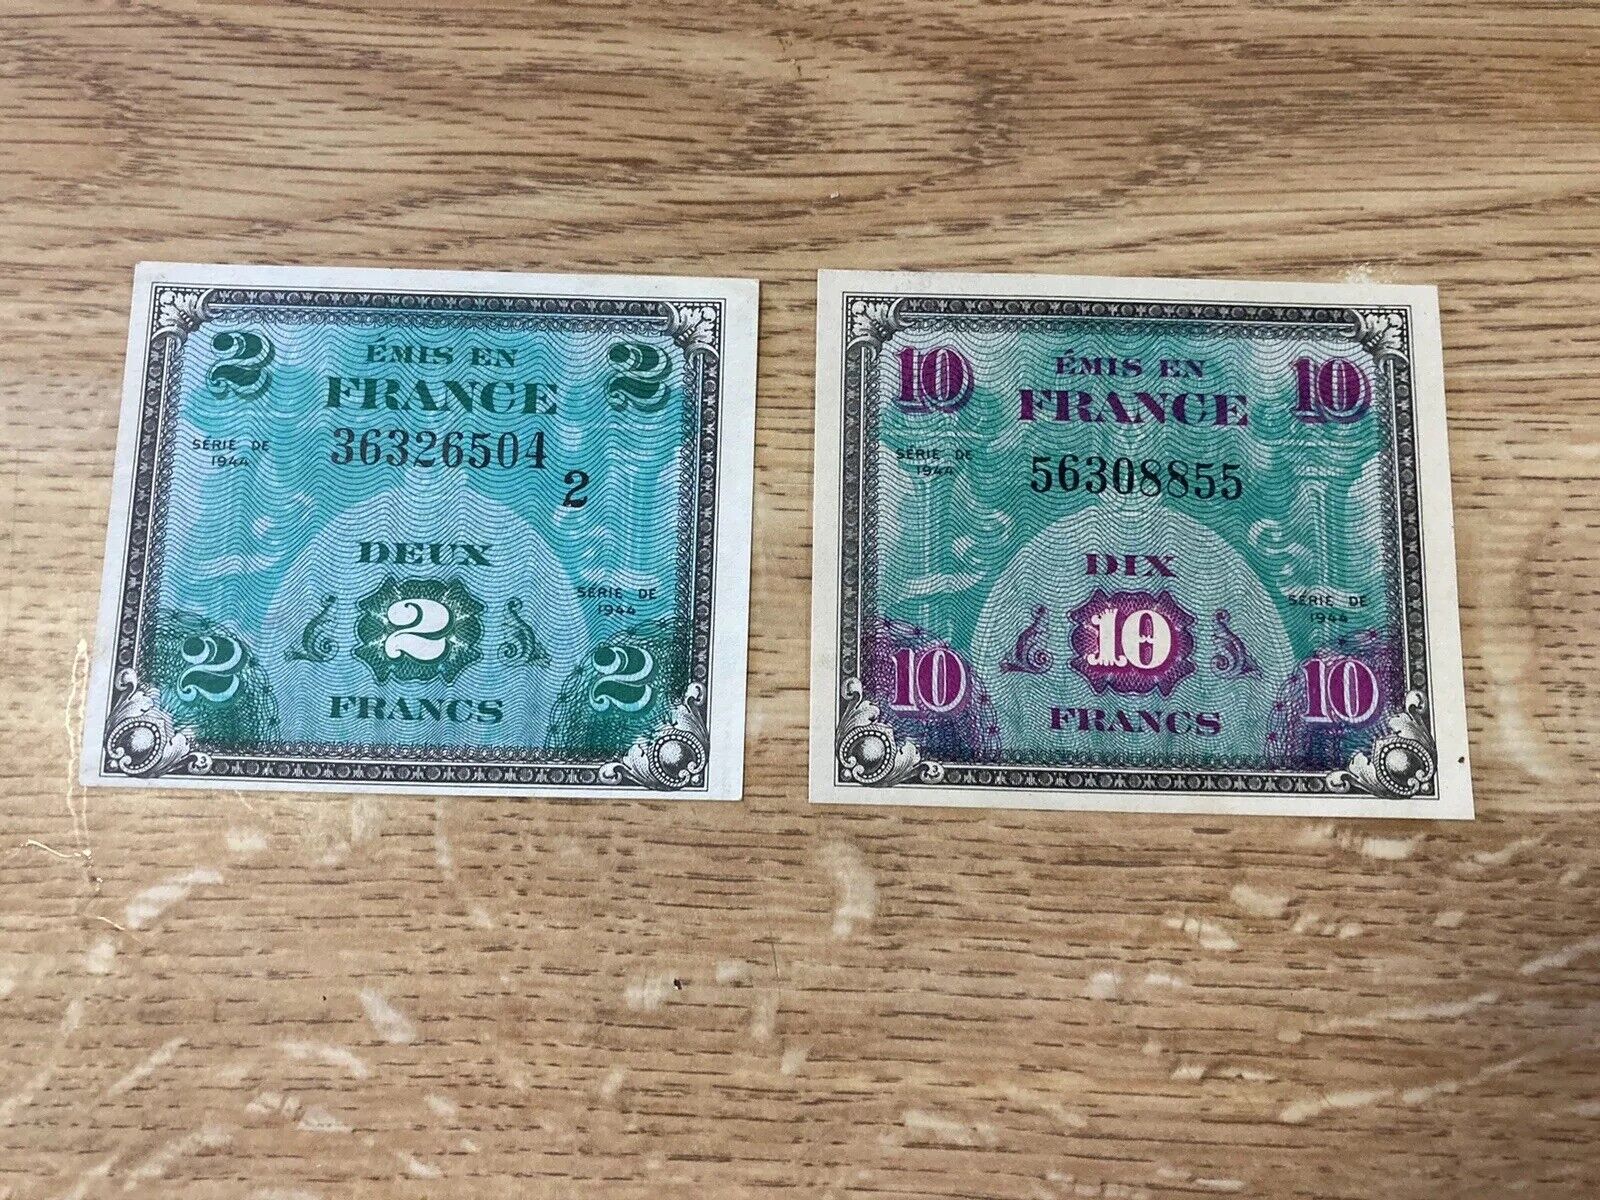 1944 French WW 2 Notes Excellent Condition 10 Franc & 2 Franc